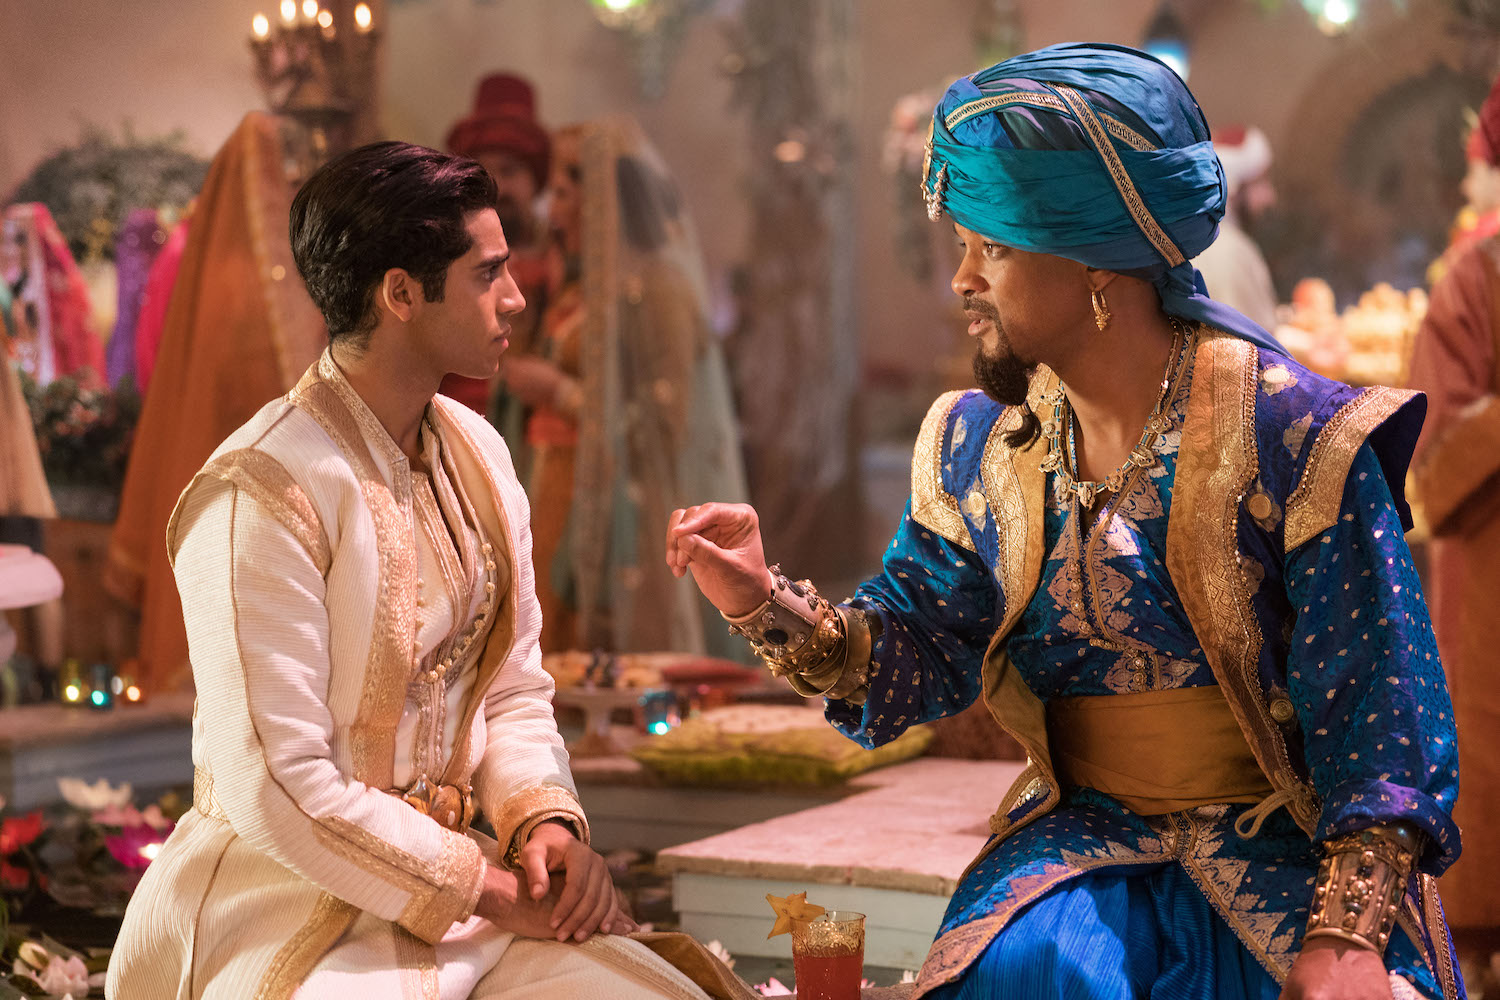 This Week In Movies… ‘Aladdin,’ ‘Brightburn,’ ‘The Proposal’